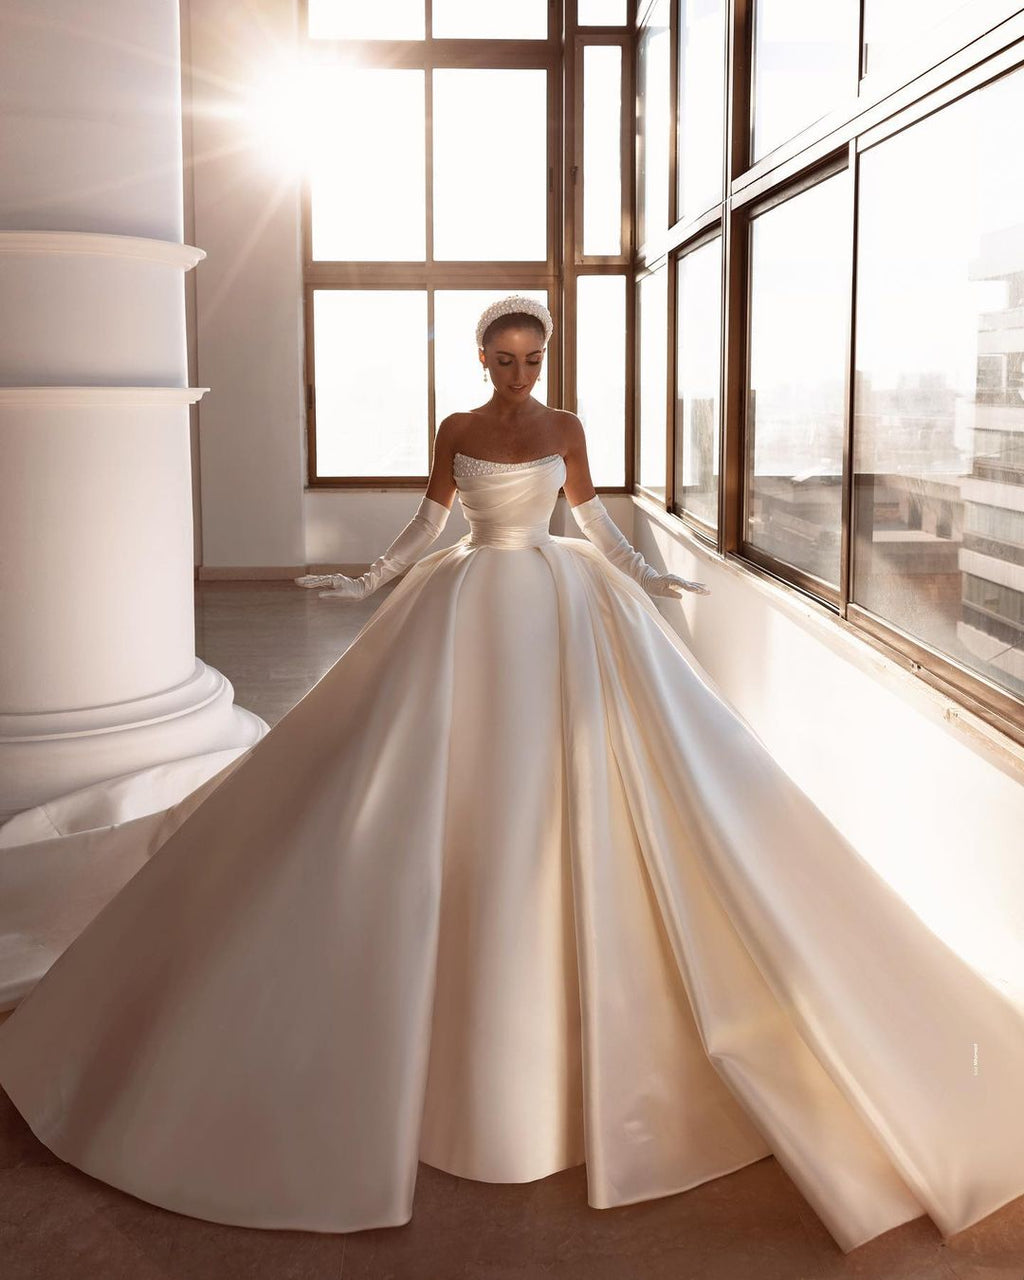 Create Your Own Quinceanera Dress Online | Cocomelody®